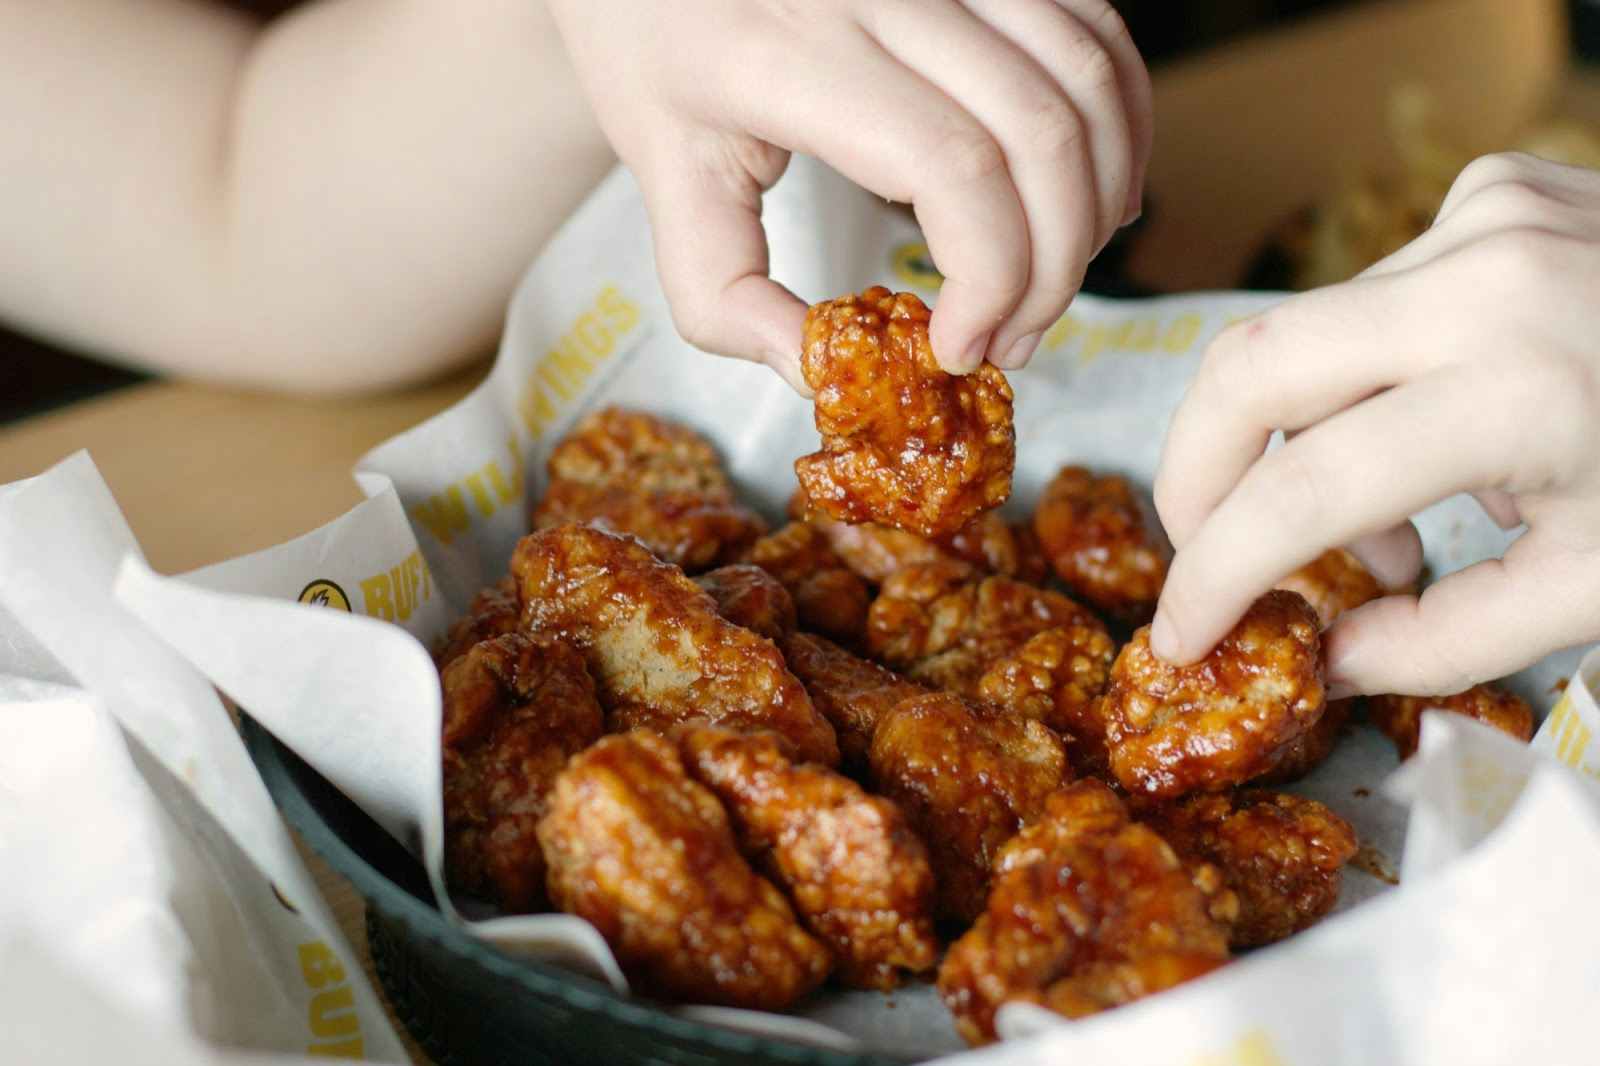 A basket of Buffalo Wild Wings boneless wings sitting on a table with two people reaching in to each take a wing.